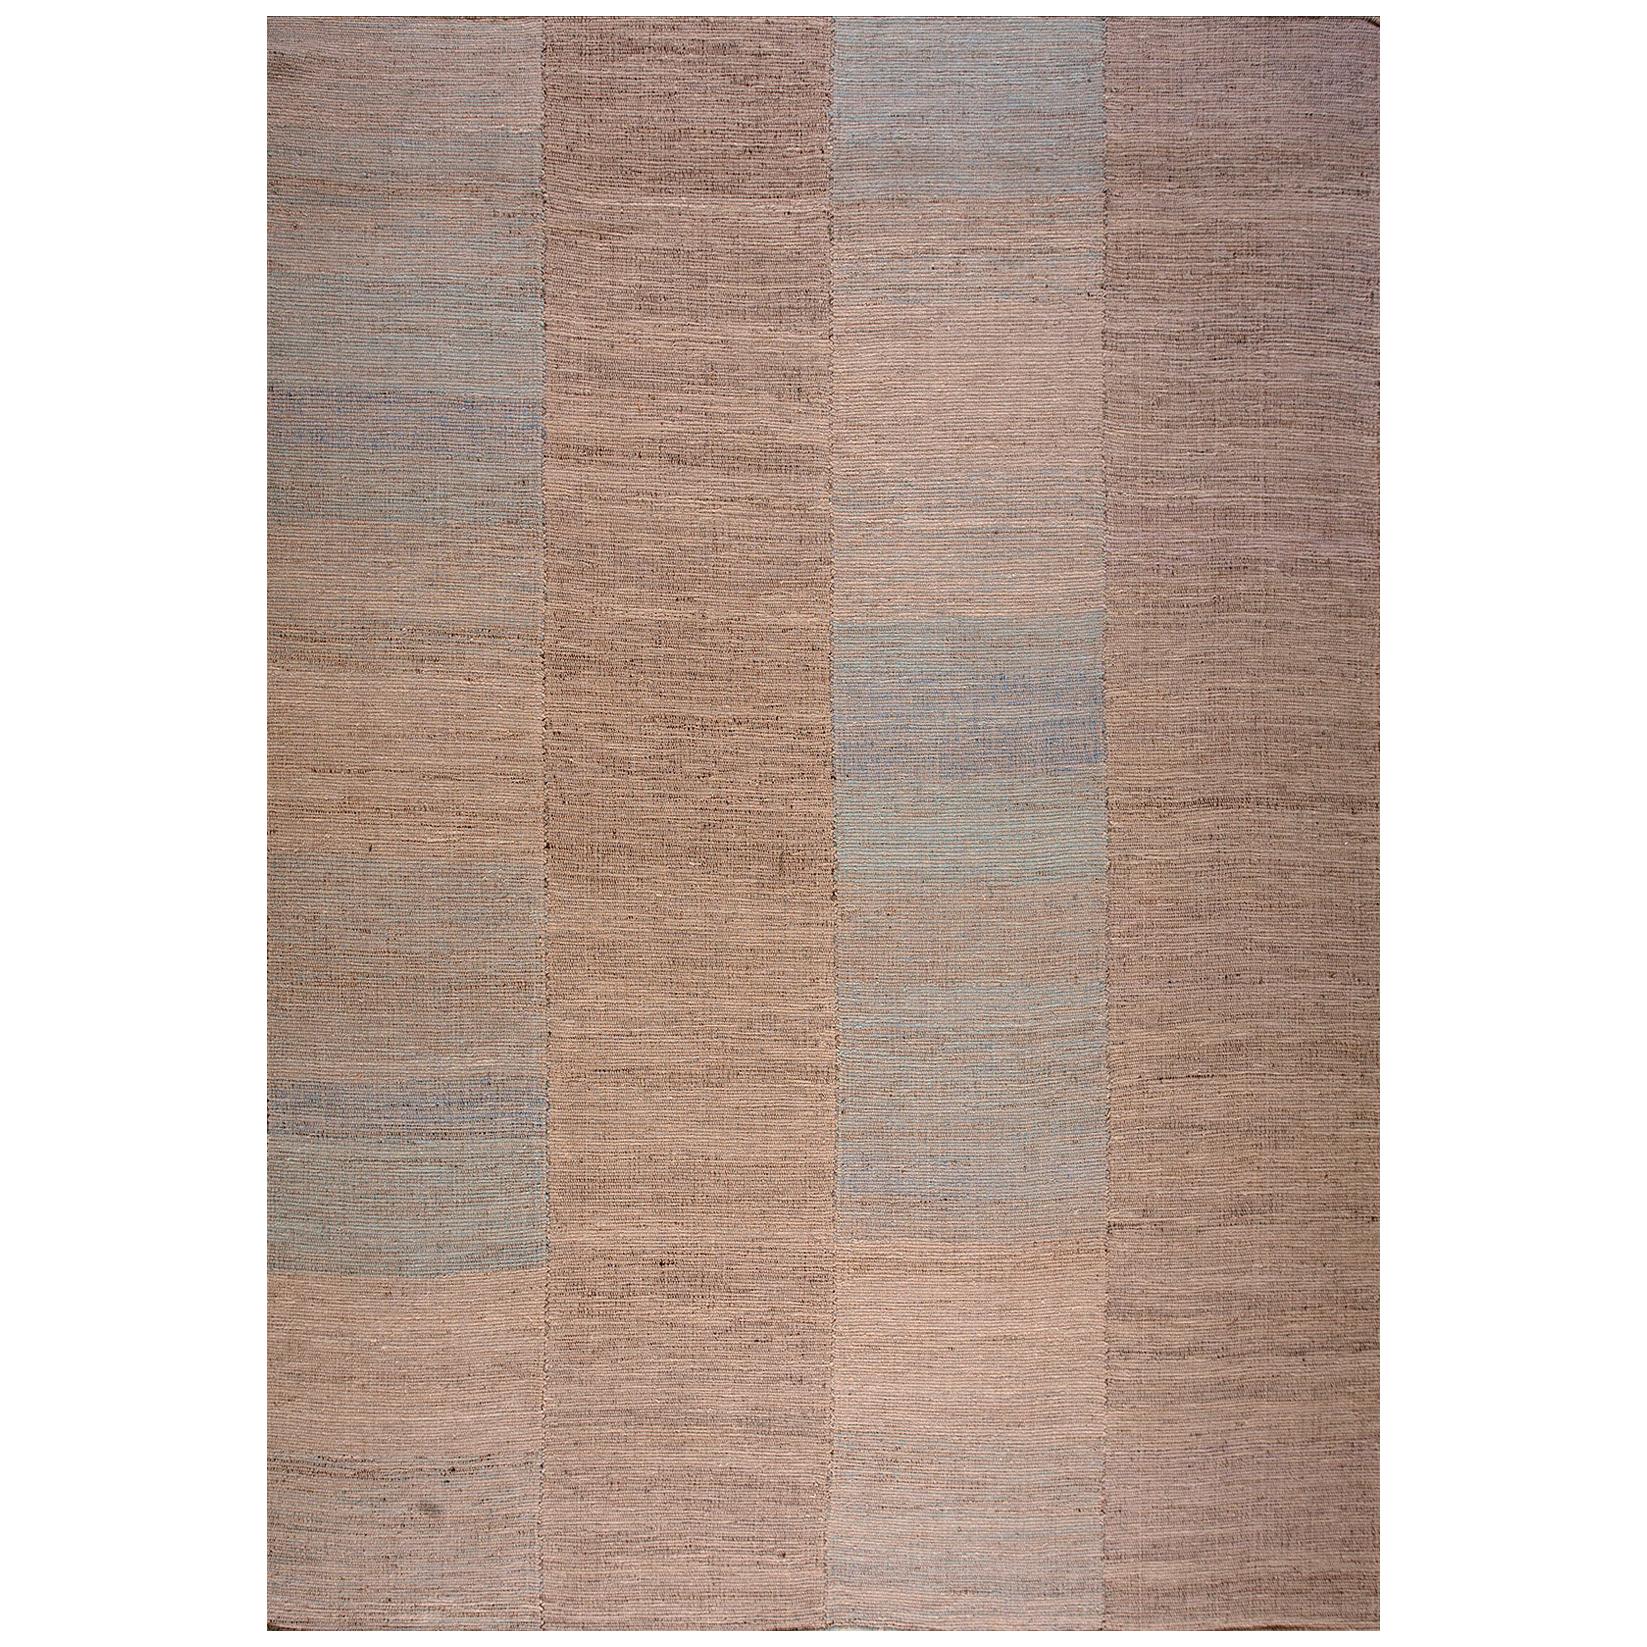 Contemporary Handwoven Wool Shaker Style Flat Weave Carpet 10' 3" x 13' 8"